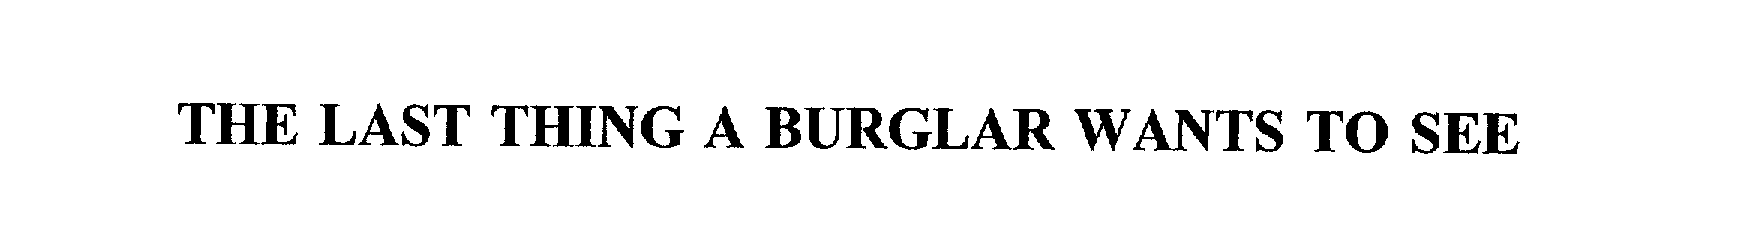  THE LAST THING A BURGLAR WANTS TO SEE